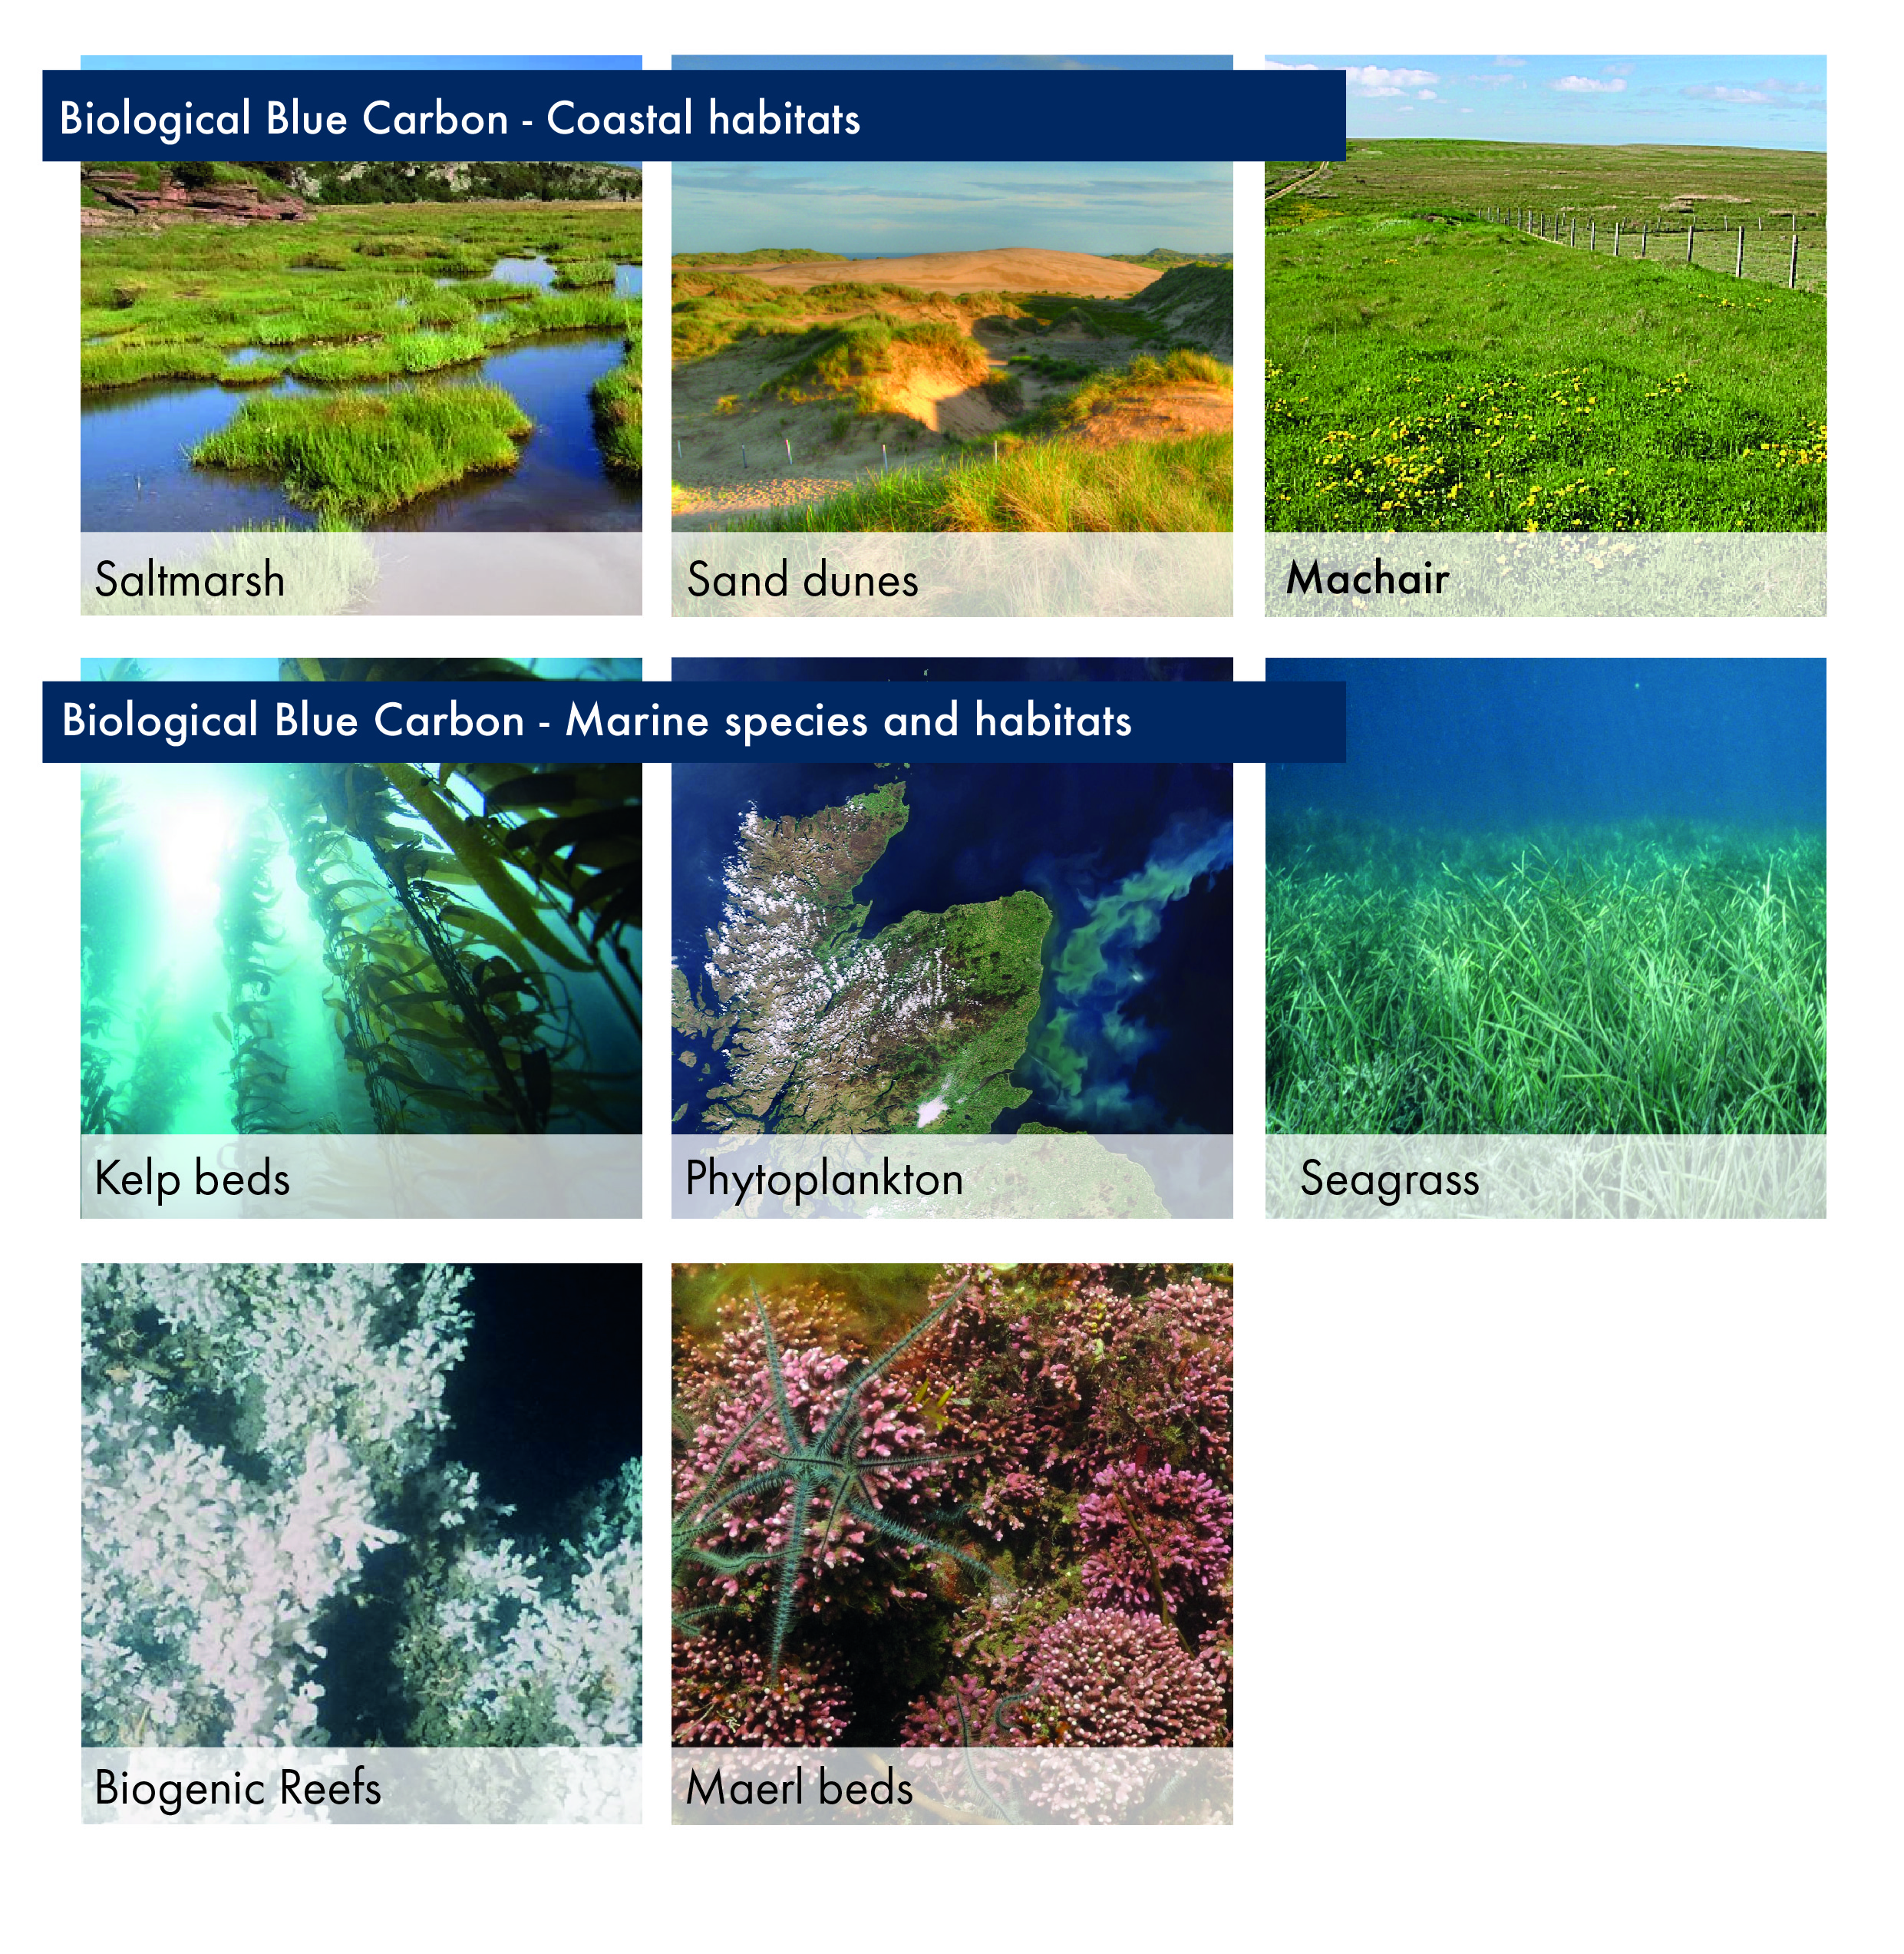 Compiled photographic images of coastal blue carbon habitats (including saltmarshes, sand dunes and machair) and biological blue carbon habitats (kelp beds, a phytoplankton bloom, seagrass beds, a cold-water coral reef and maerl beds).